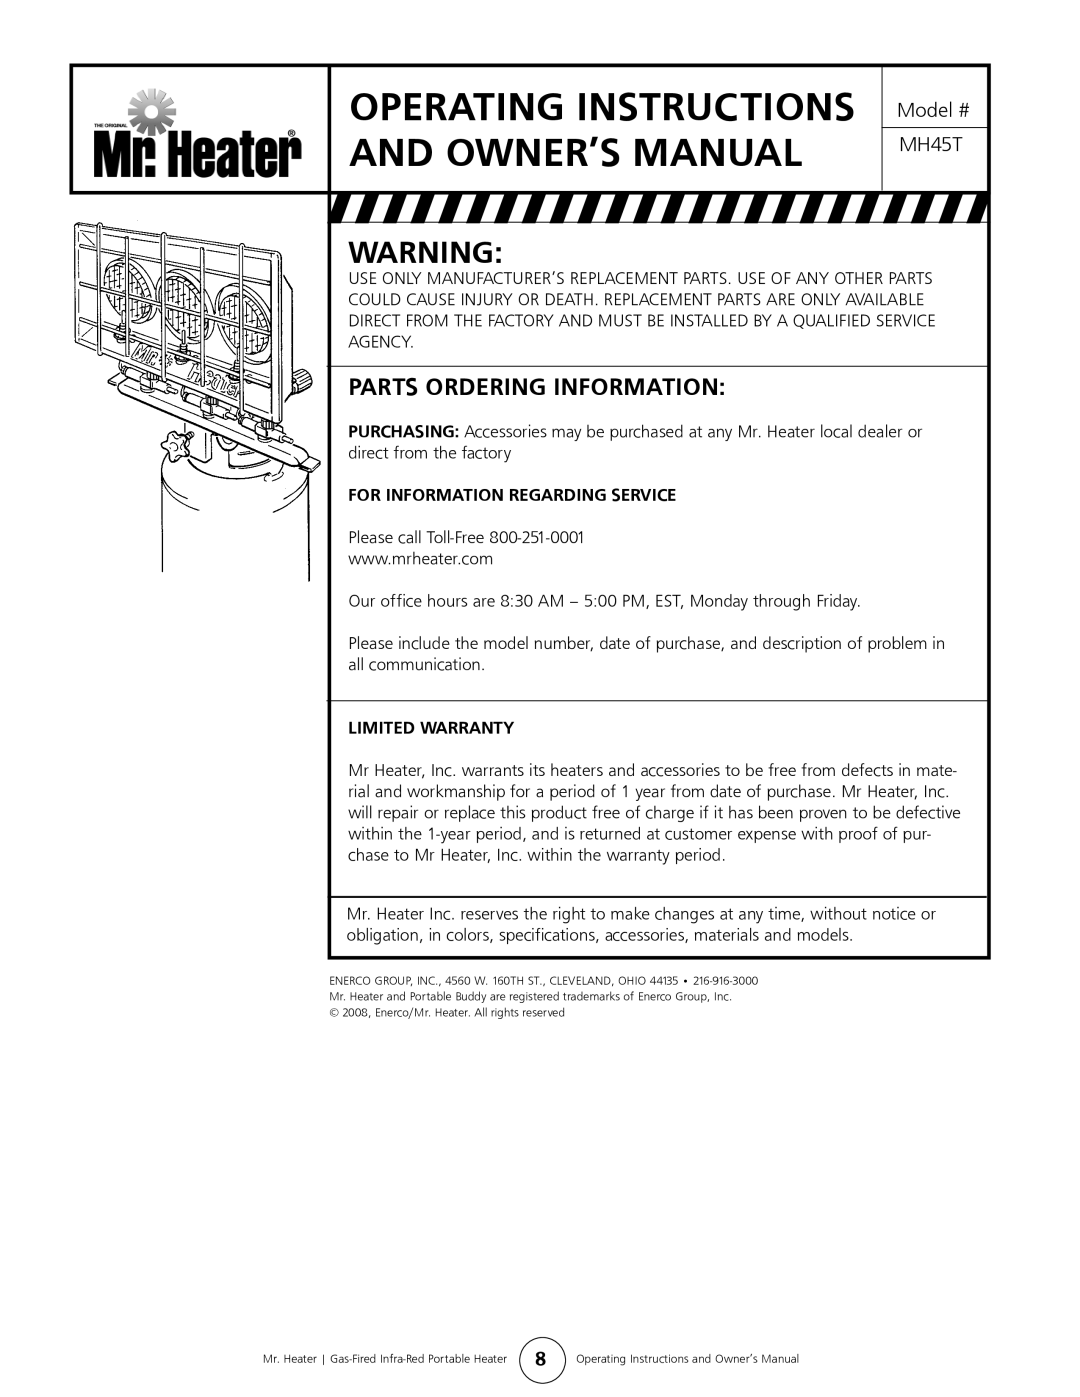 Mr. Heater MH45T owner manual Parts Ordering Information, For Information Regarding Service, Limited Warranty 